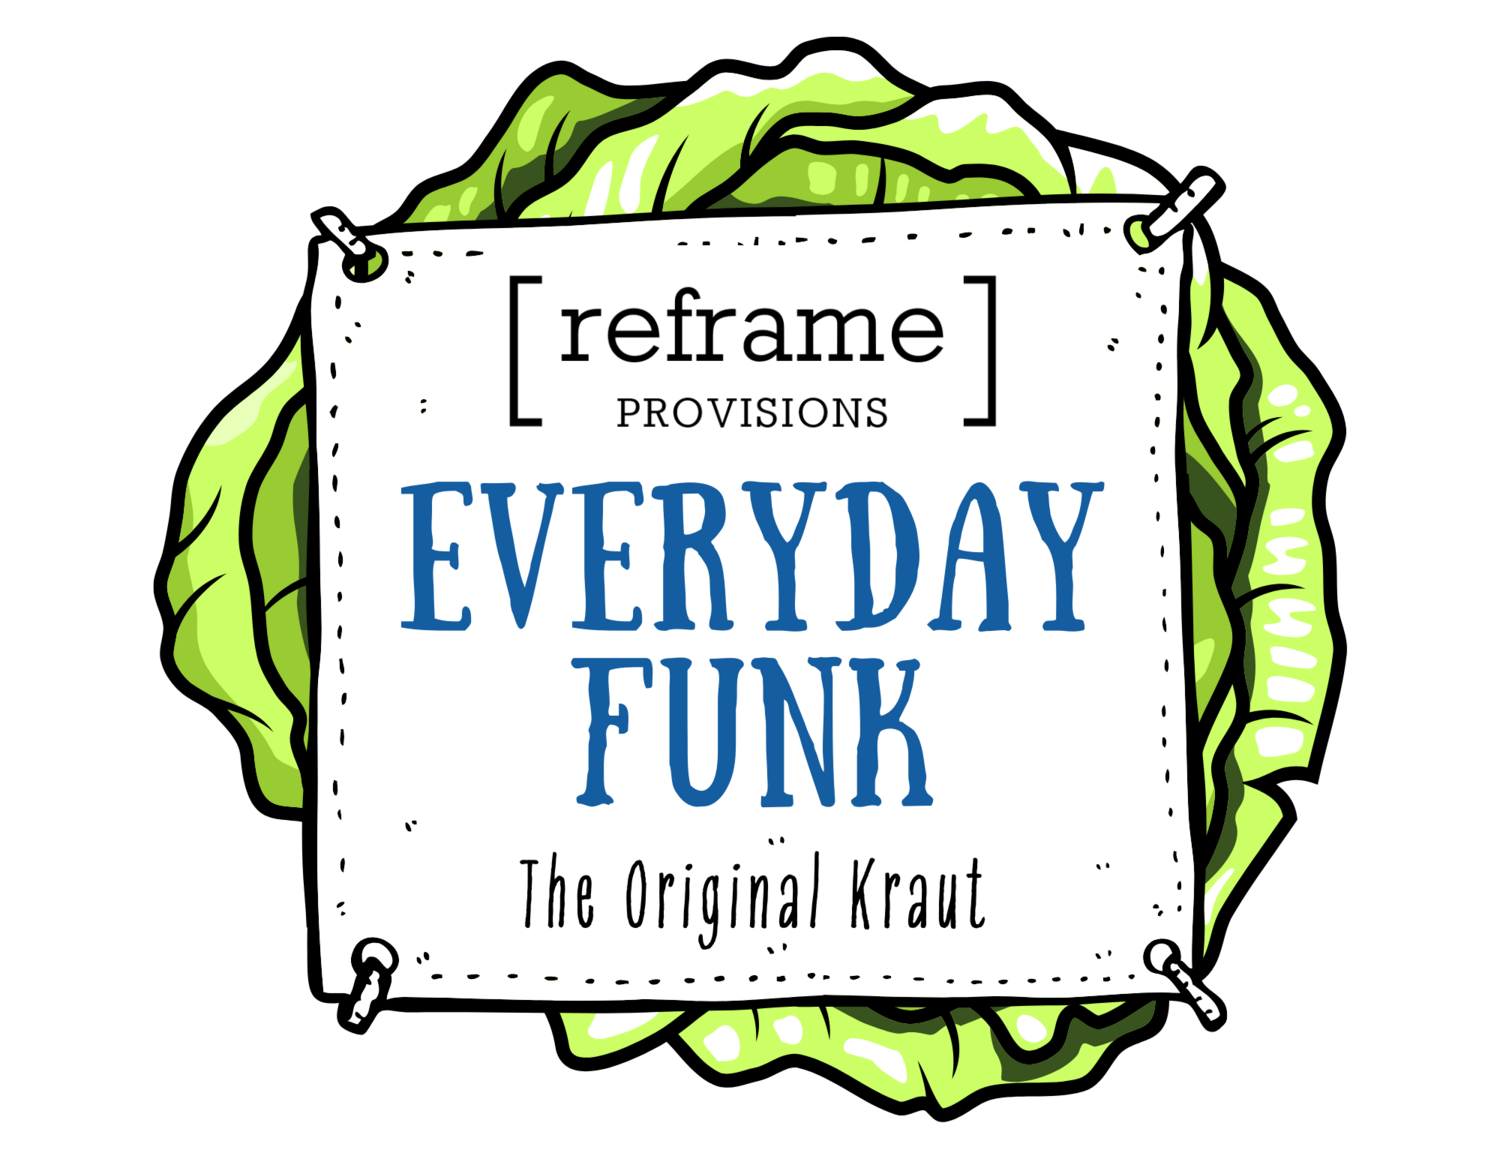 Kraut Starter Pack: Give Me All the Funk